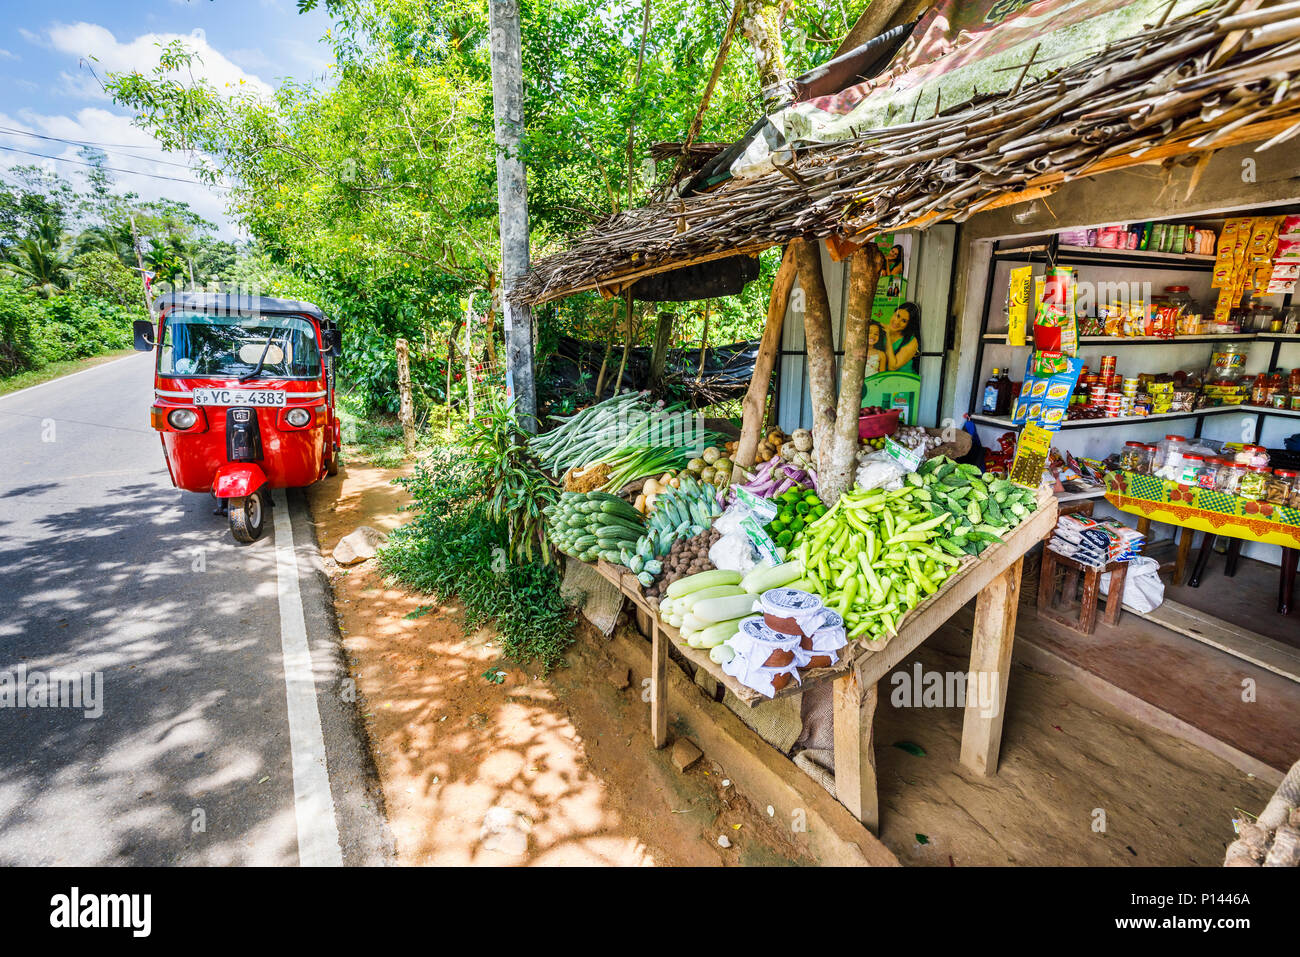 Red tuk-tuk parked in the road outside a rural roadside vegetable and grocery stall with local produce, Horagampita district, near Galle, Sri Lanka Stock Photo